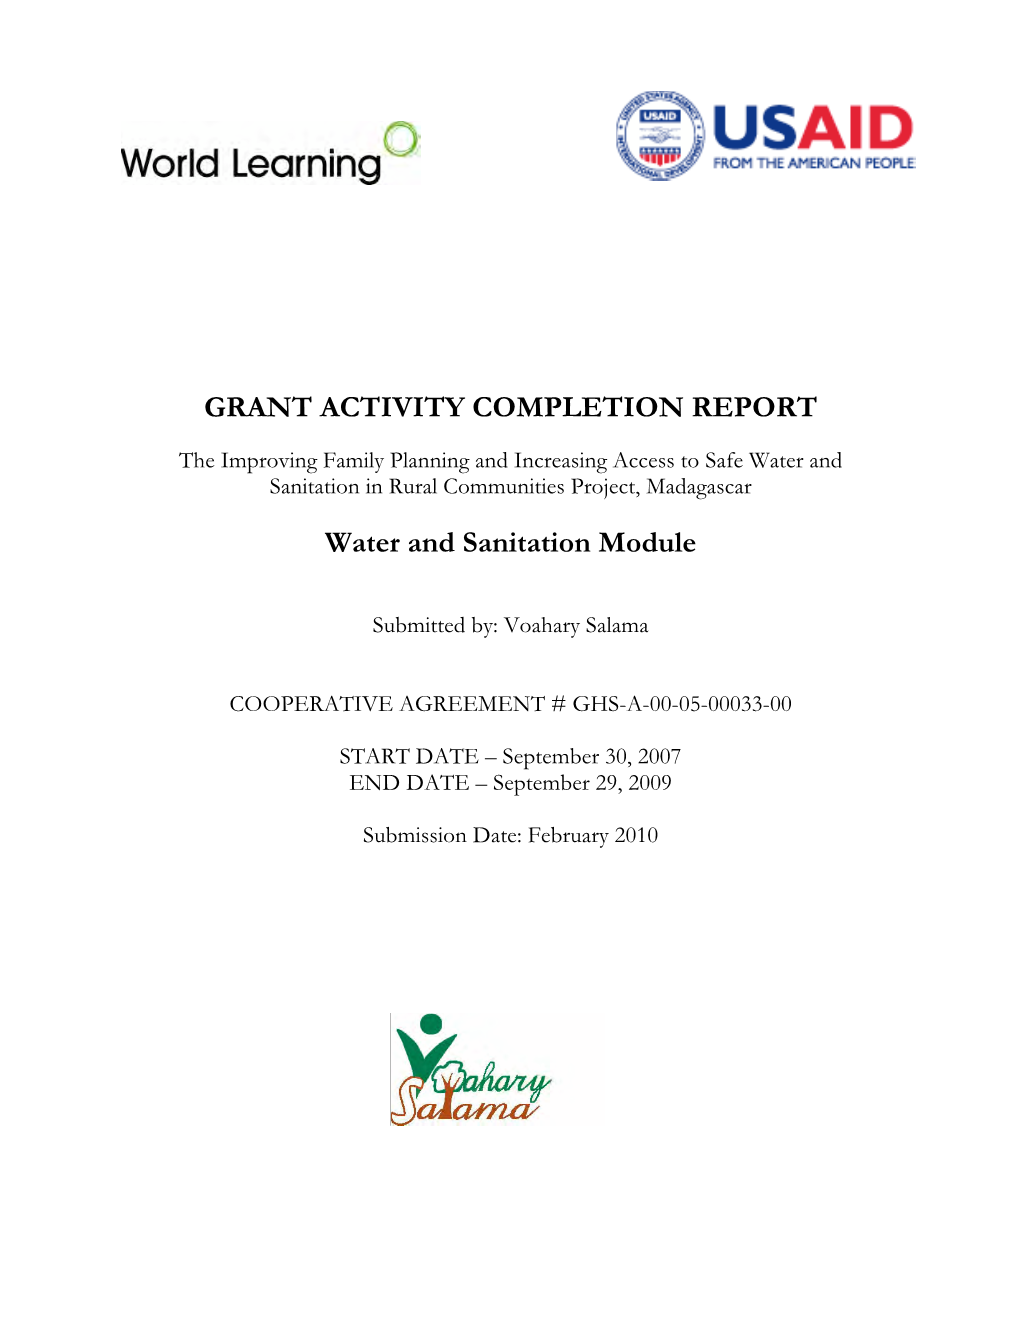 GRANT ACTIVITY COMPLETION REPORT Water and Sanitation